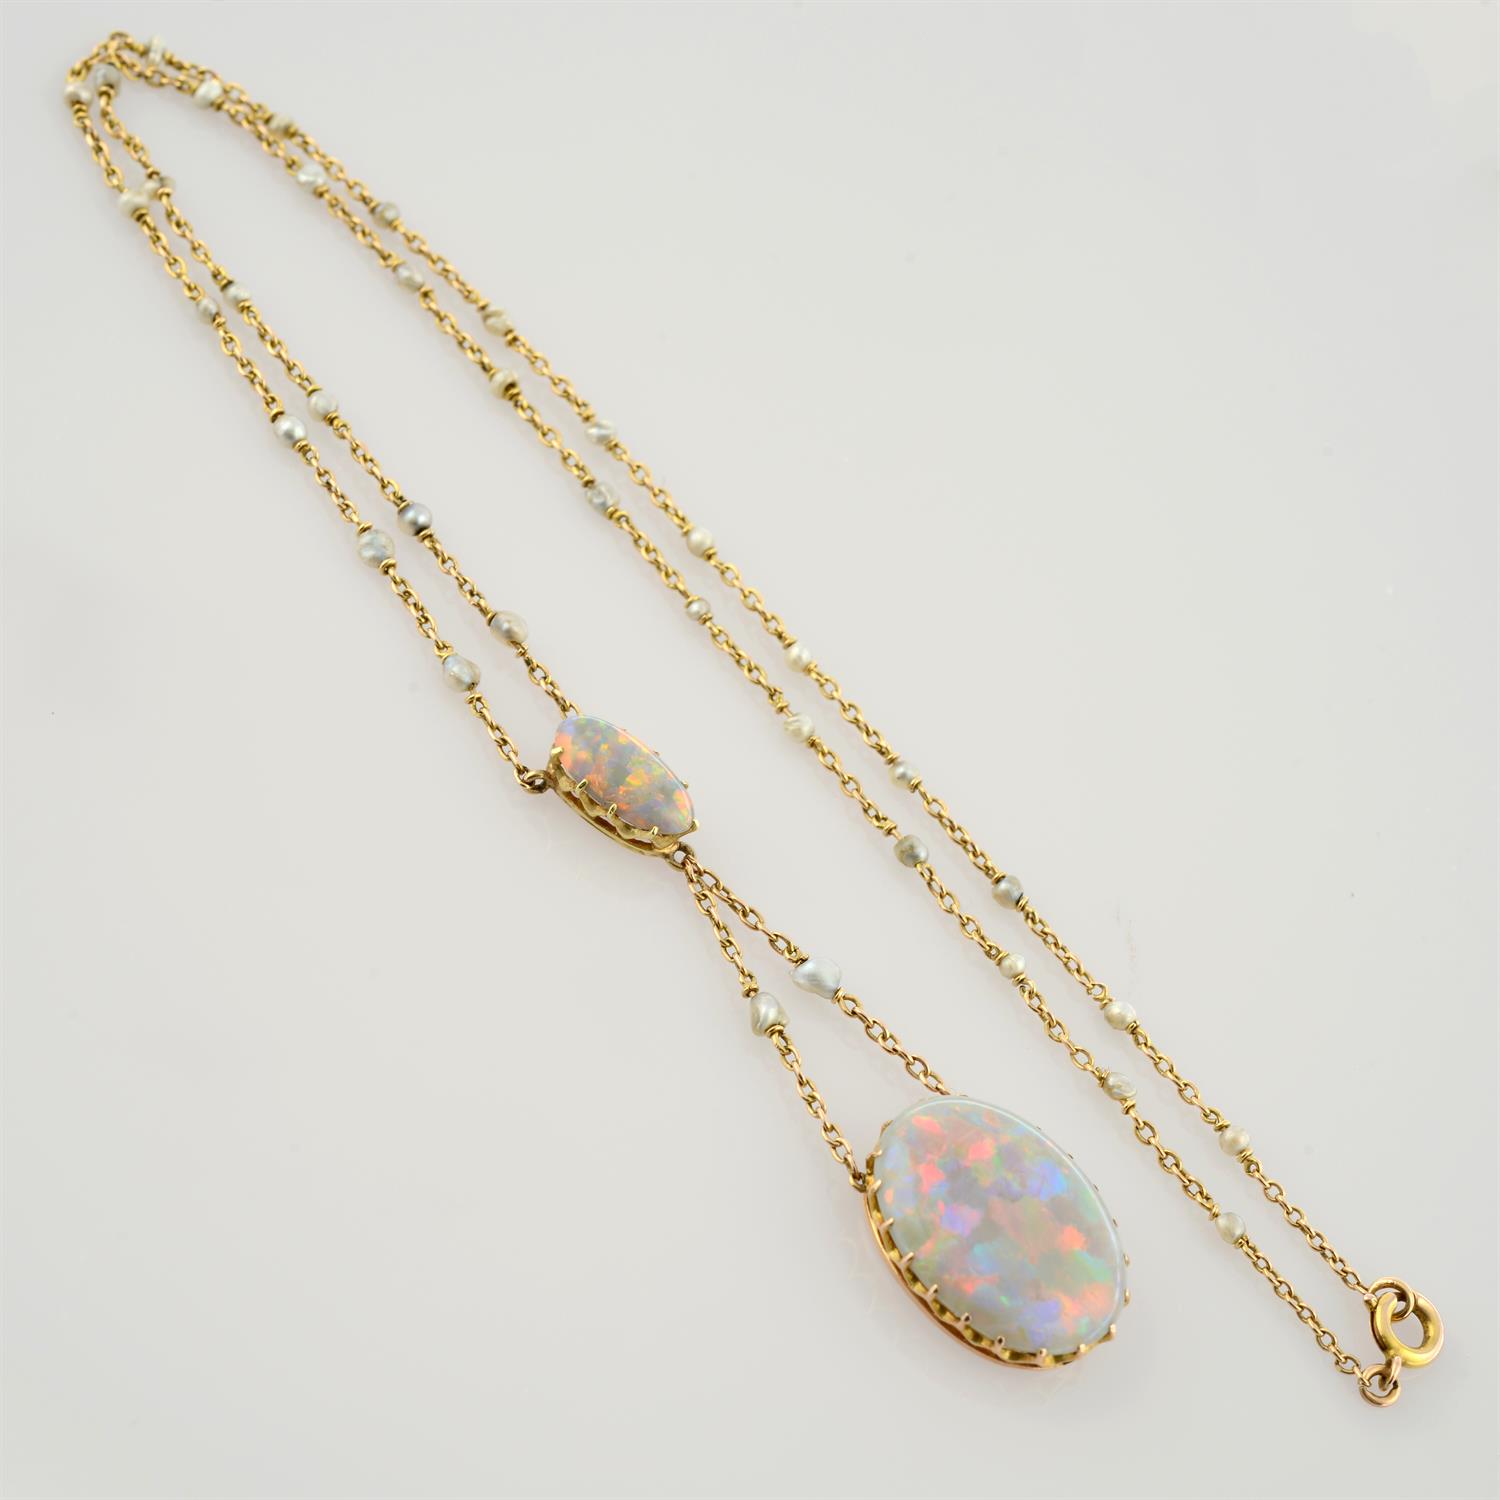 An early 20th century 14ct gold opal necklace, with seed pearl spacer trace-link chain. - Image 4 of 5